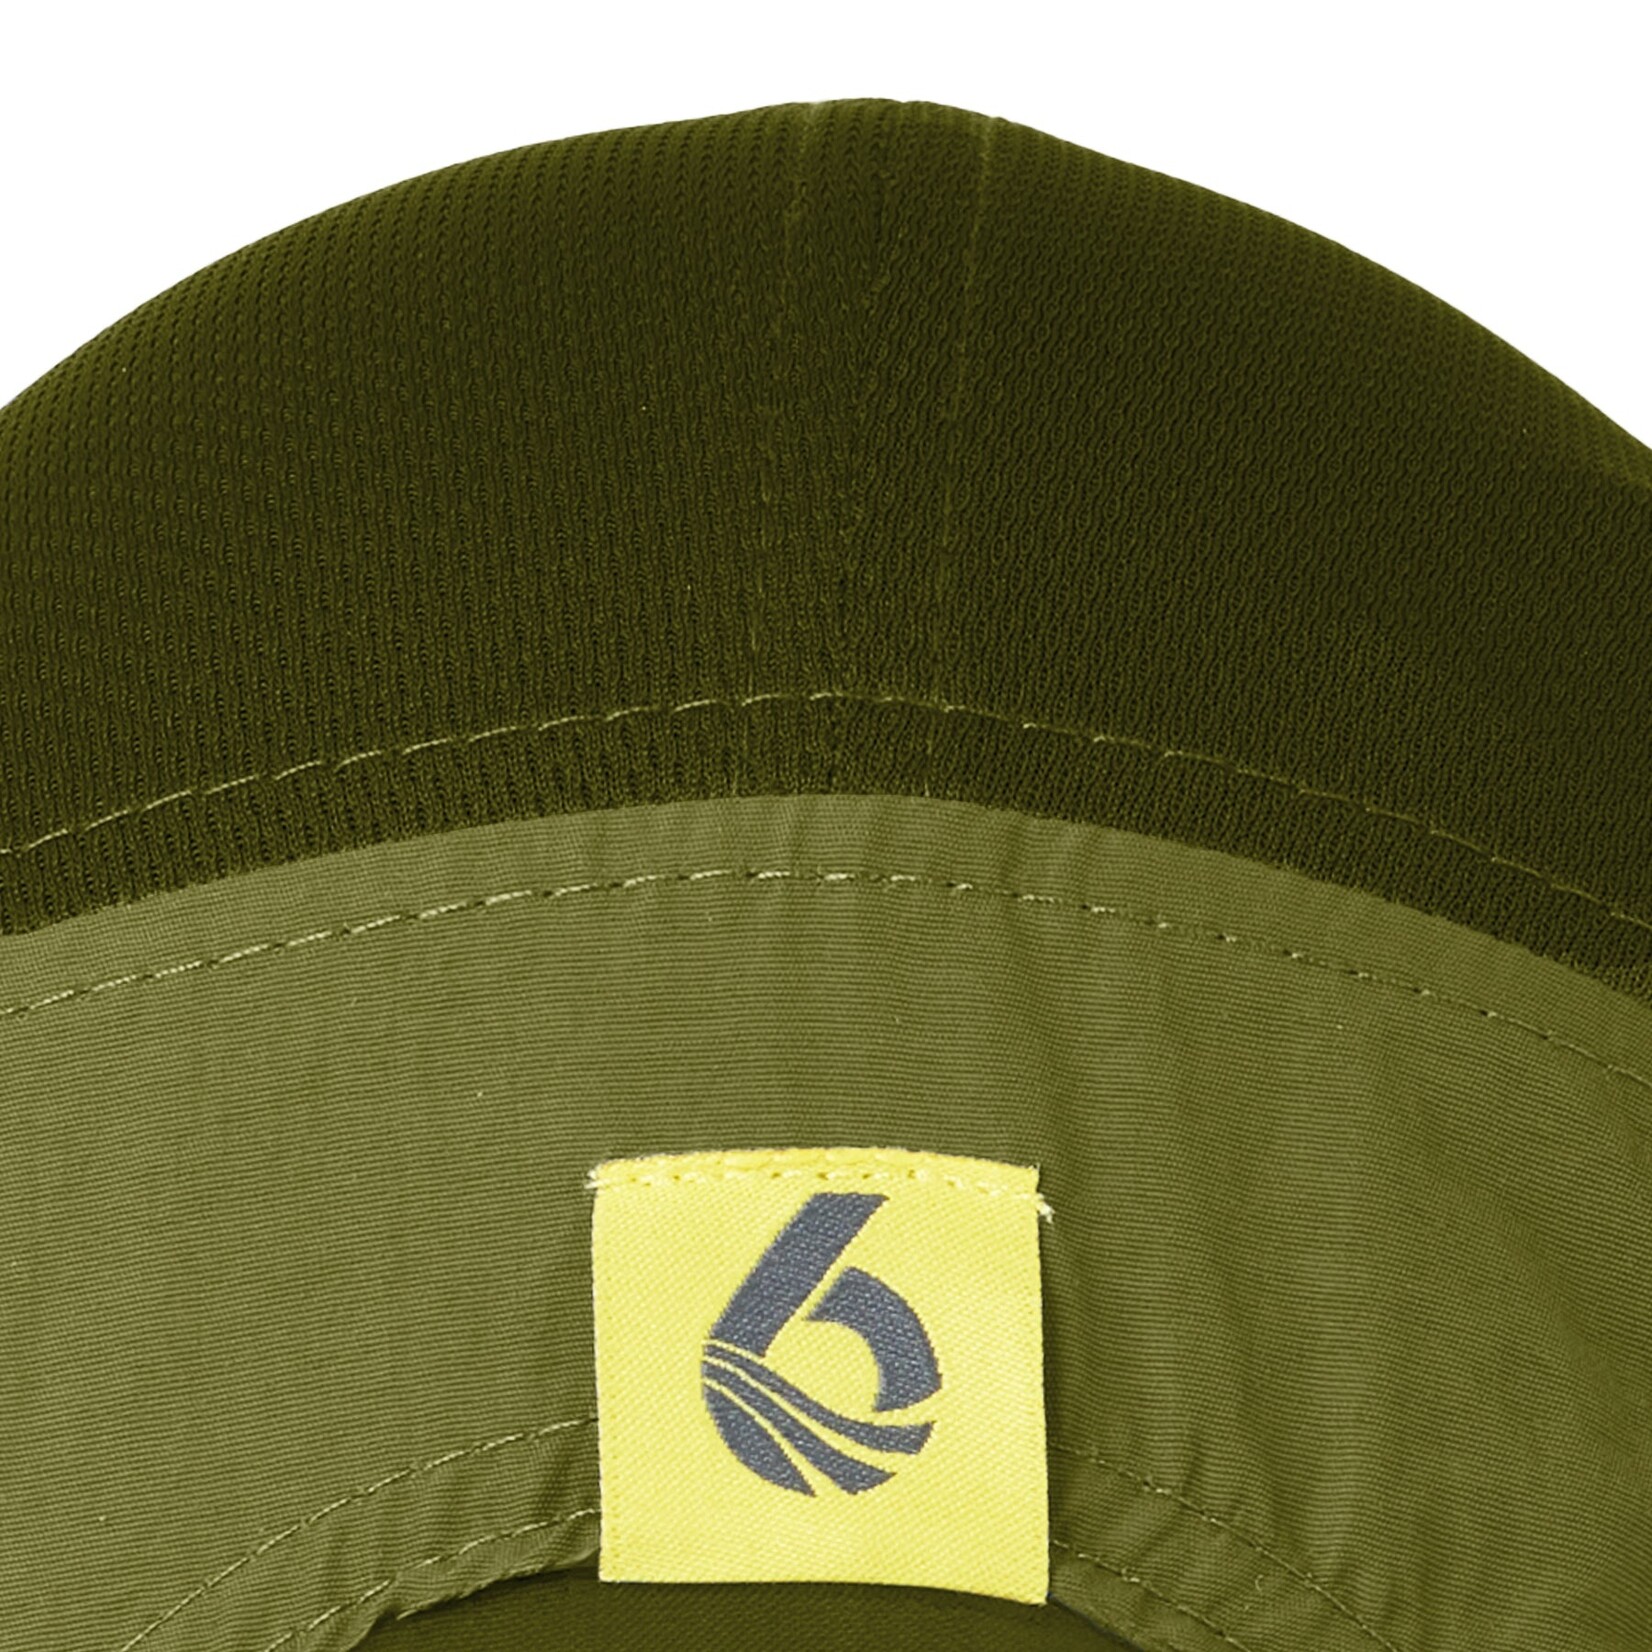 Level Six Level Six Poly Five Polyester 5 Panel Hat